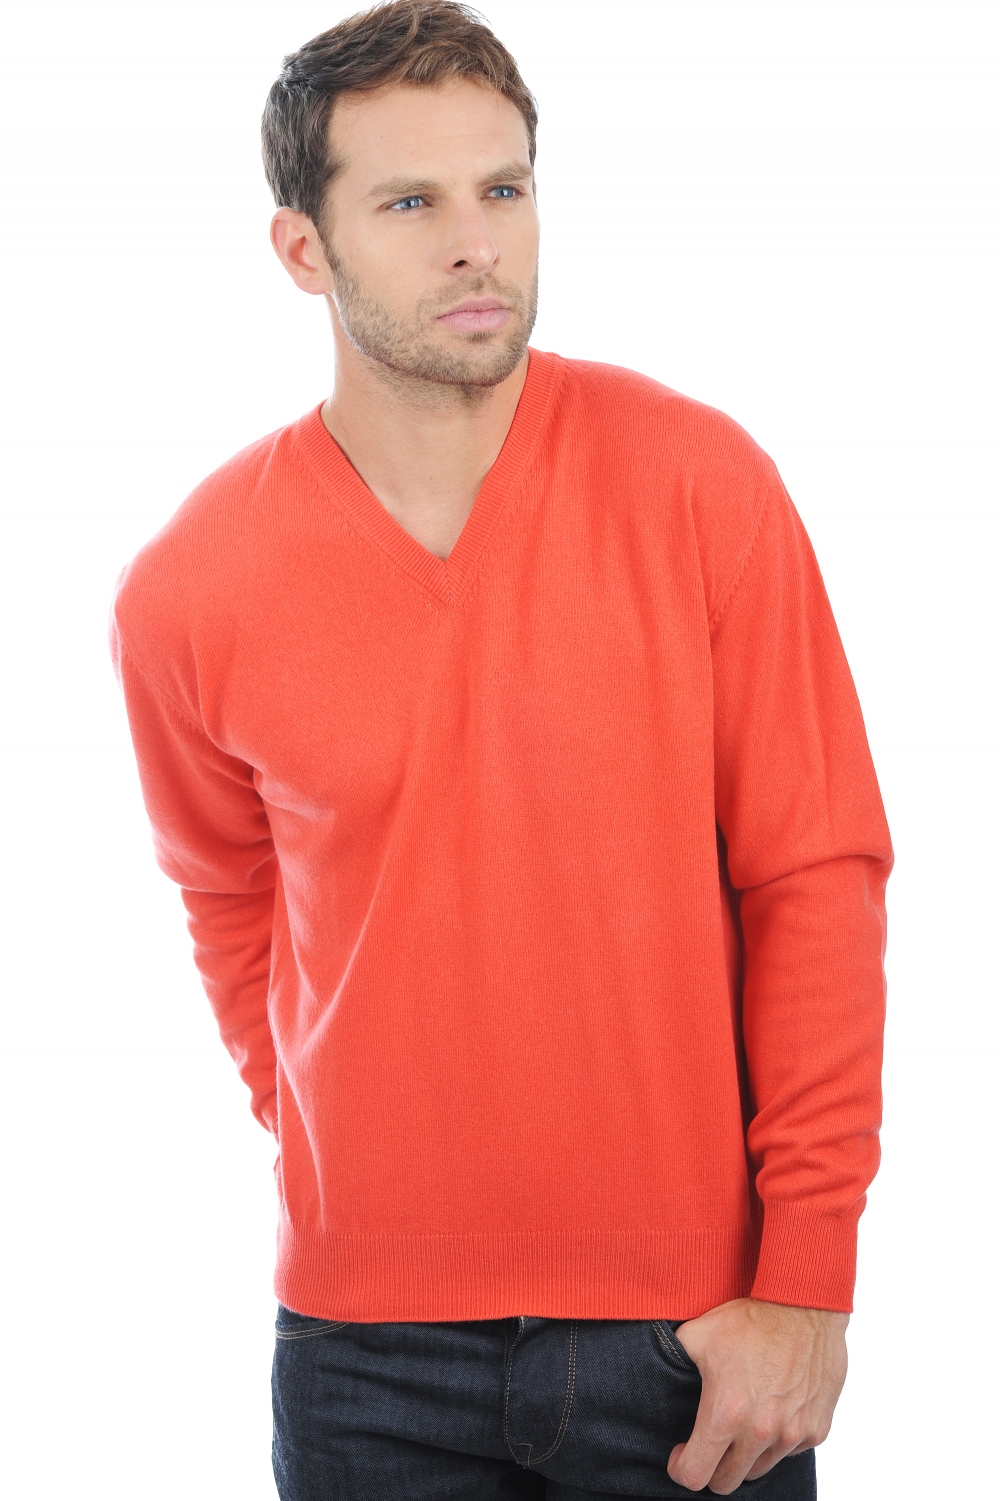 Cachemire pull homme col v gaspard corail lumineux s